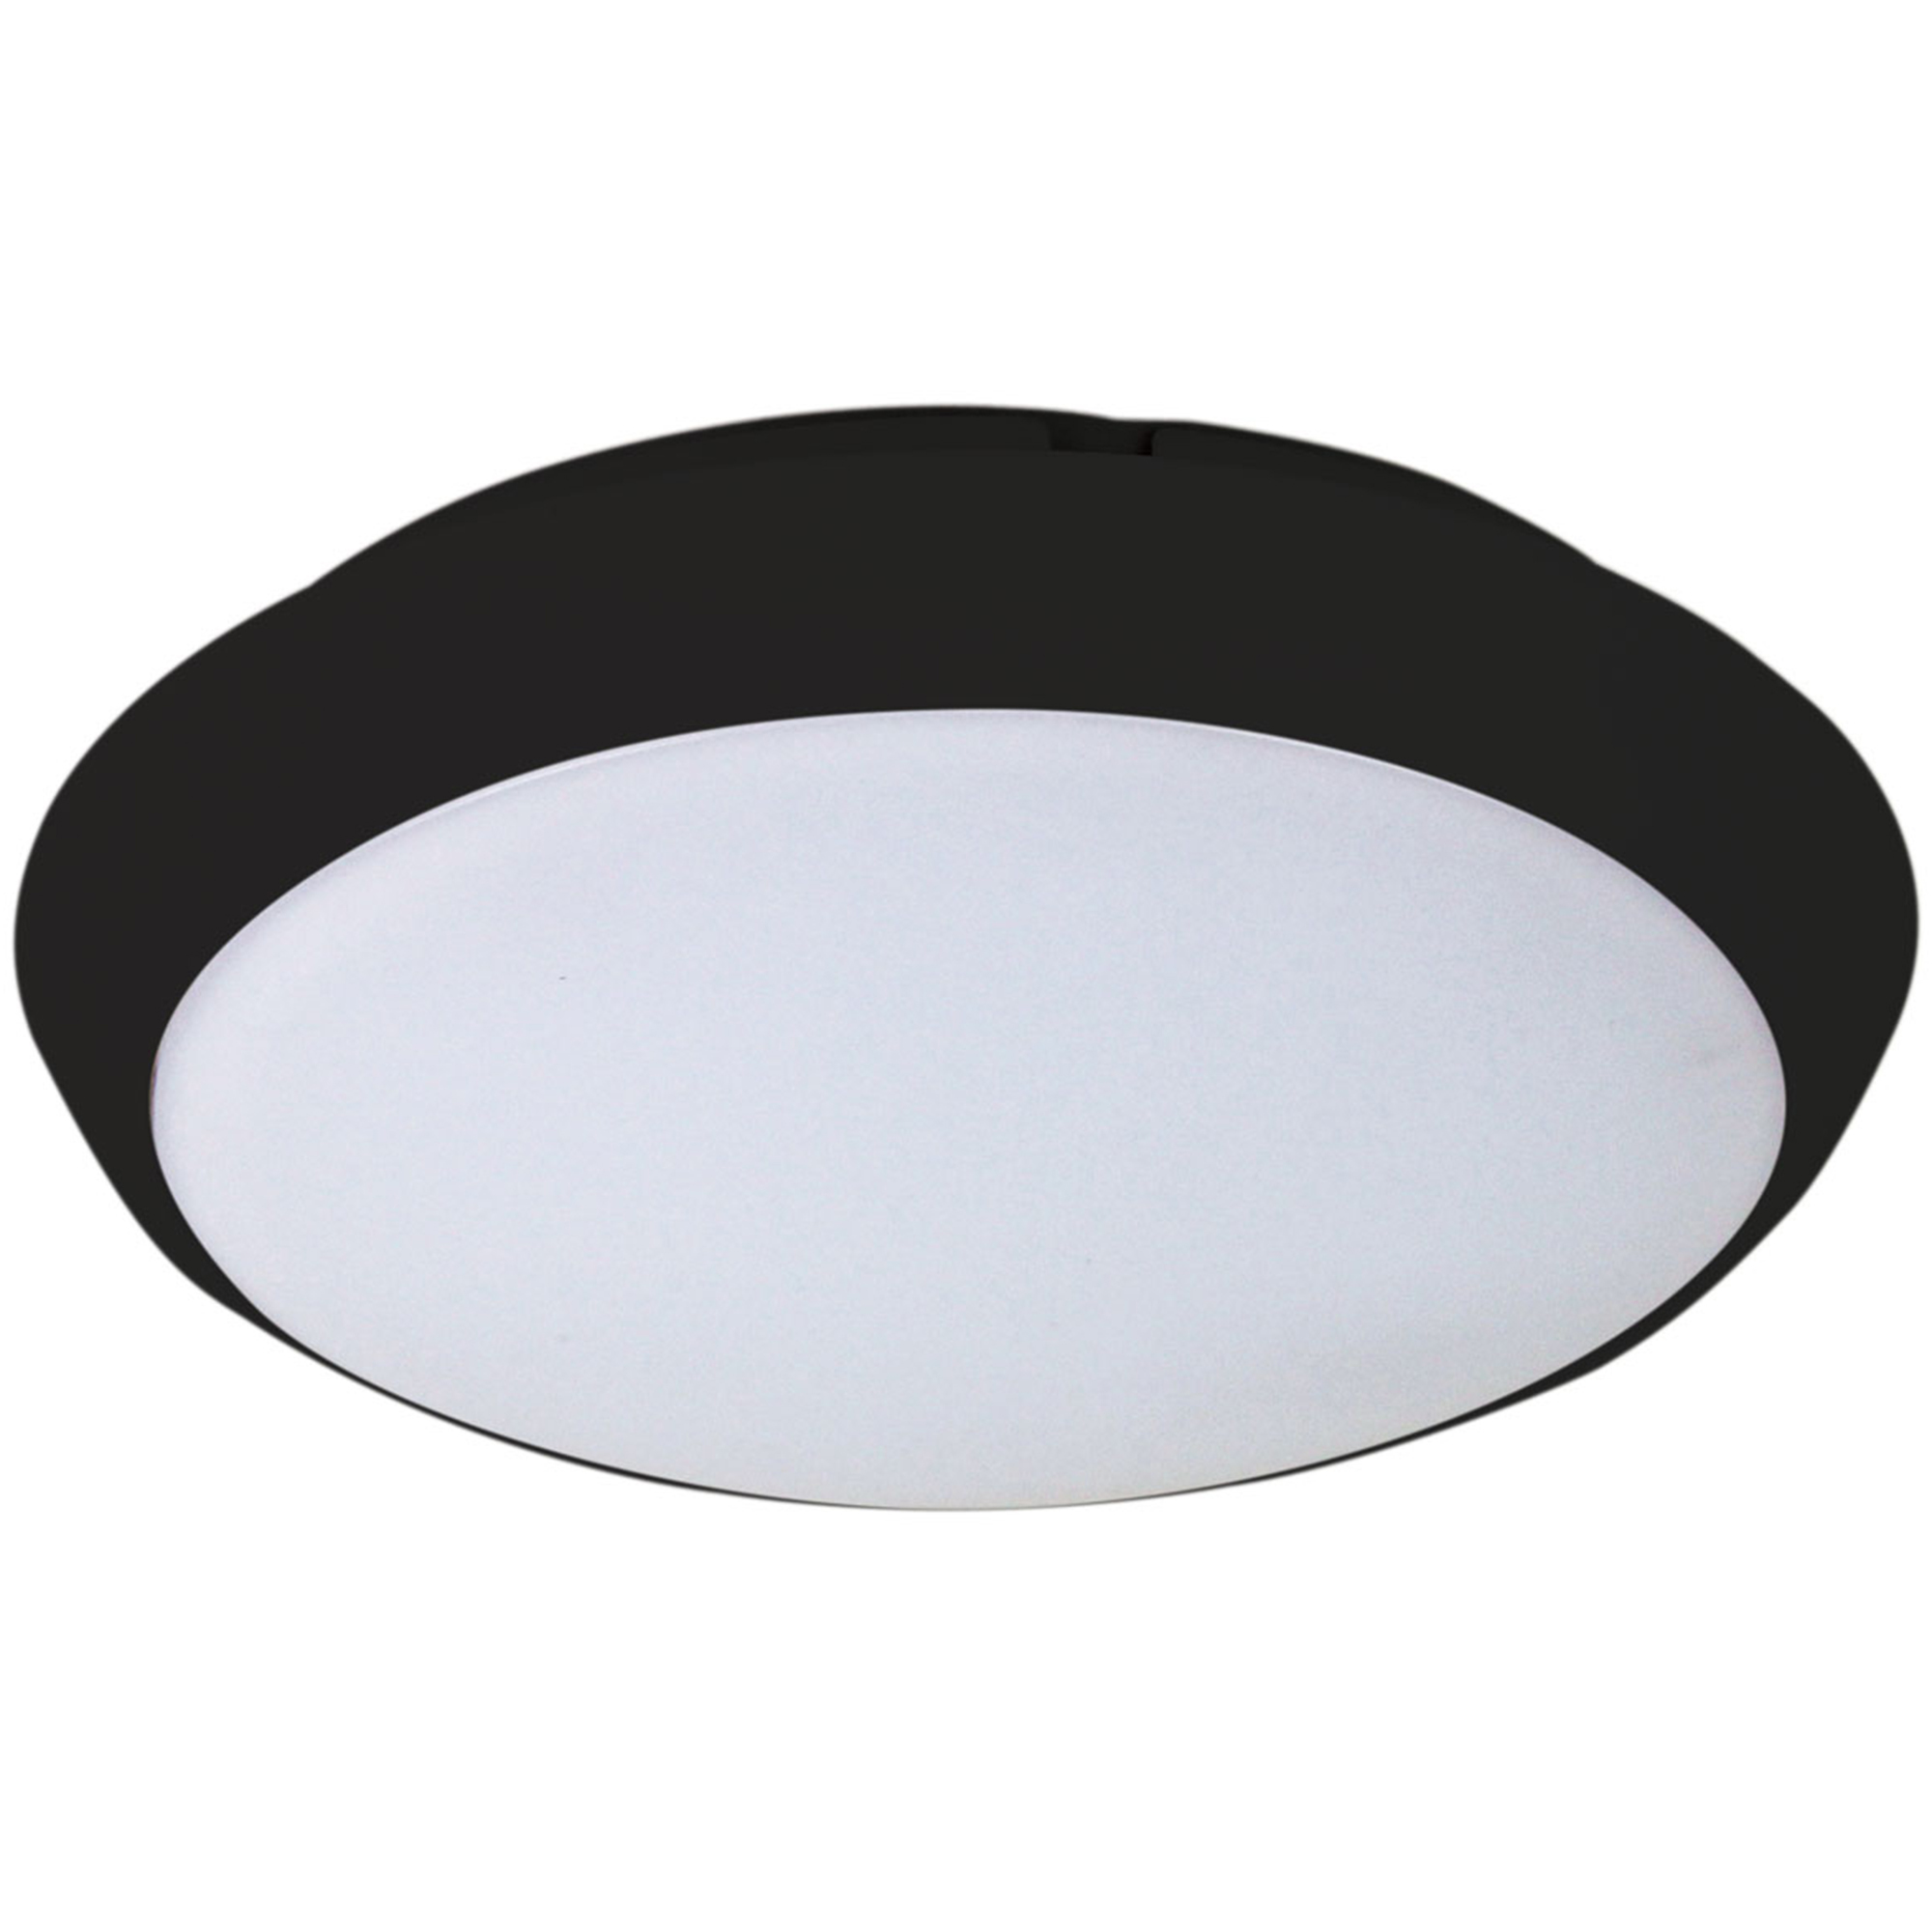 Kore Led Dimmable Ceiling Light Temple Webster